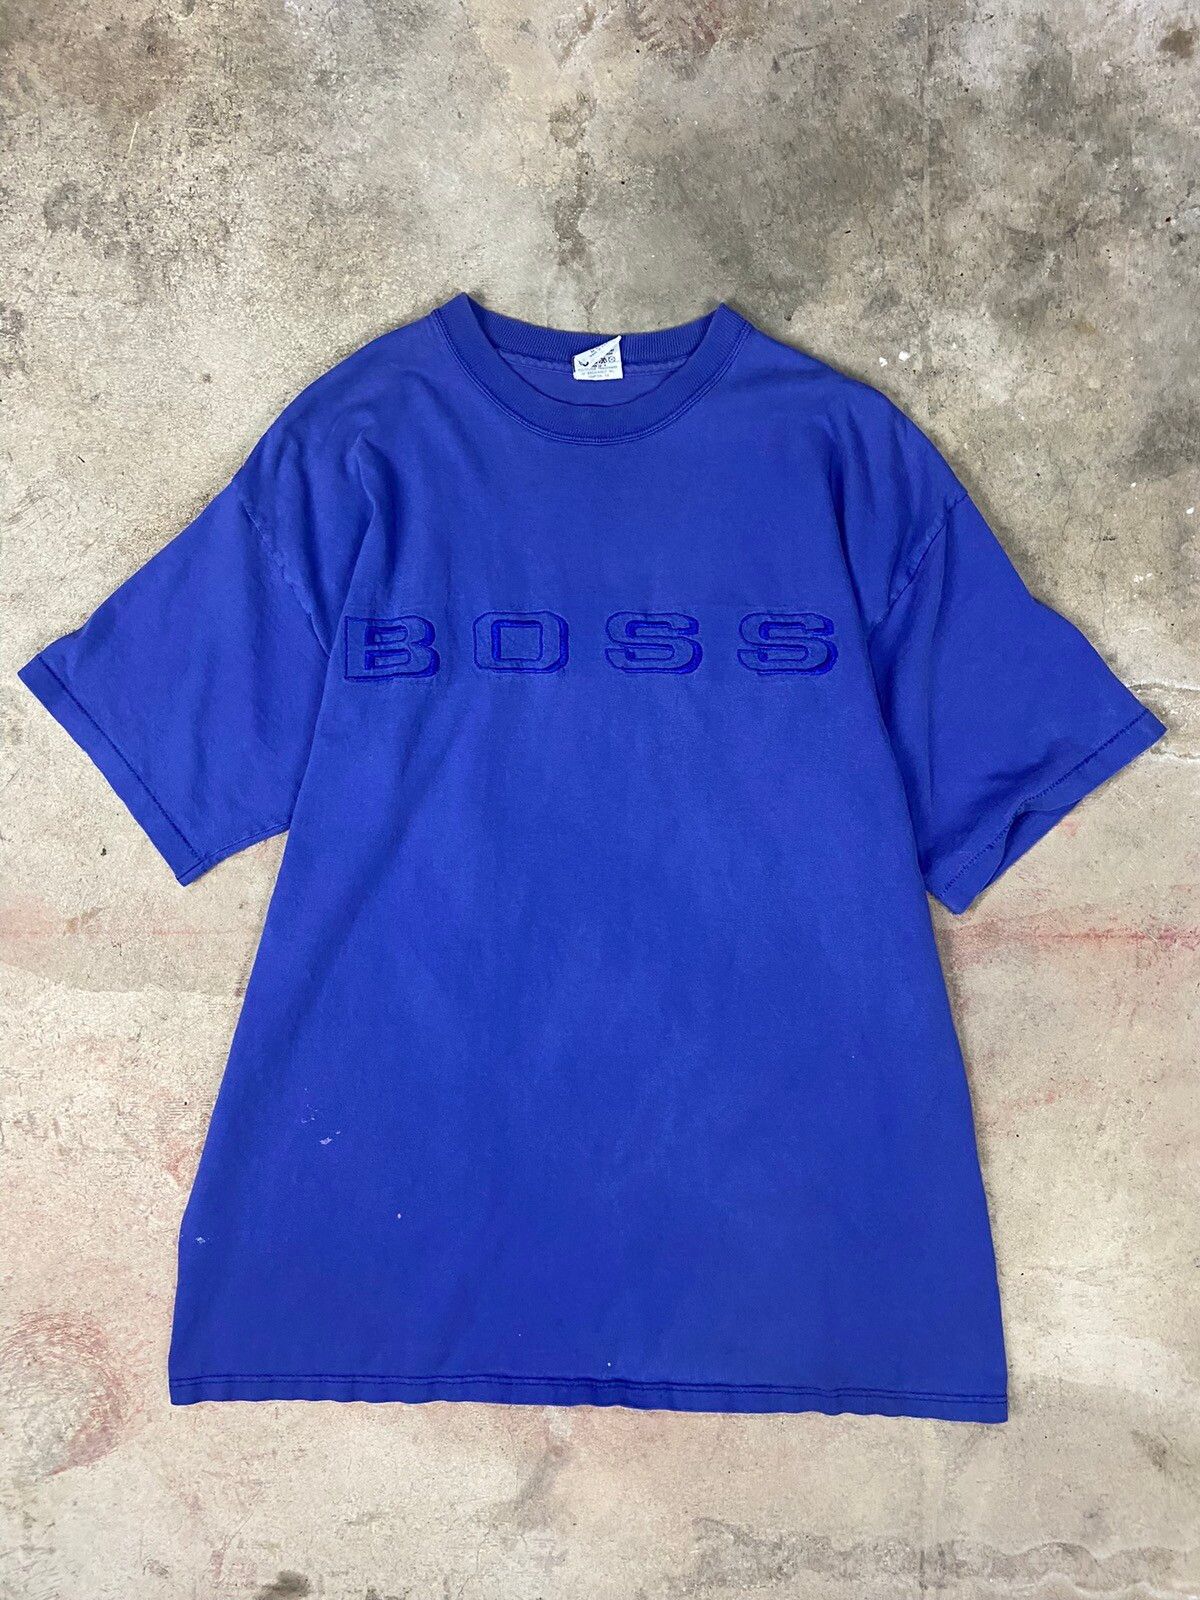 Vintage Vintage boss embroidered lightly faded script t shirt Size US XL / EU 56 / 4 - 1 Preview